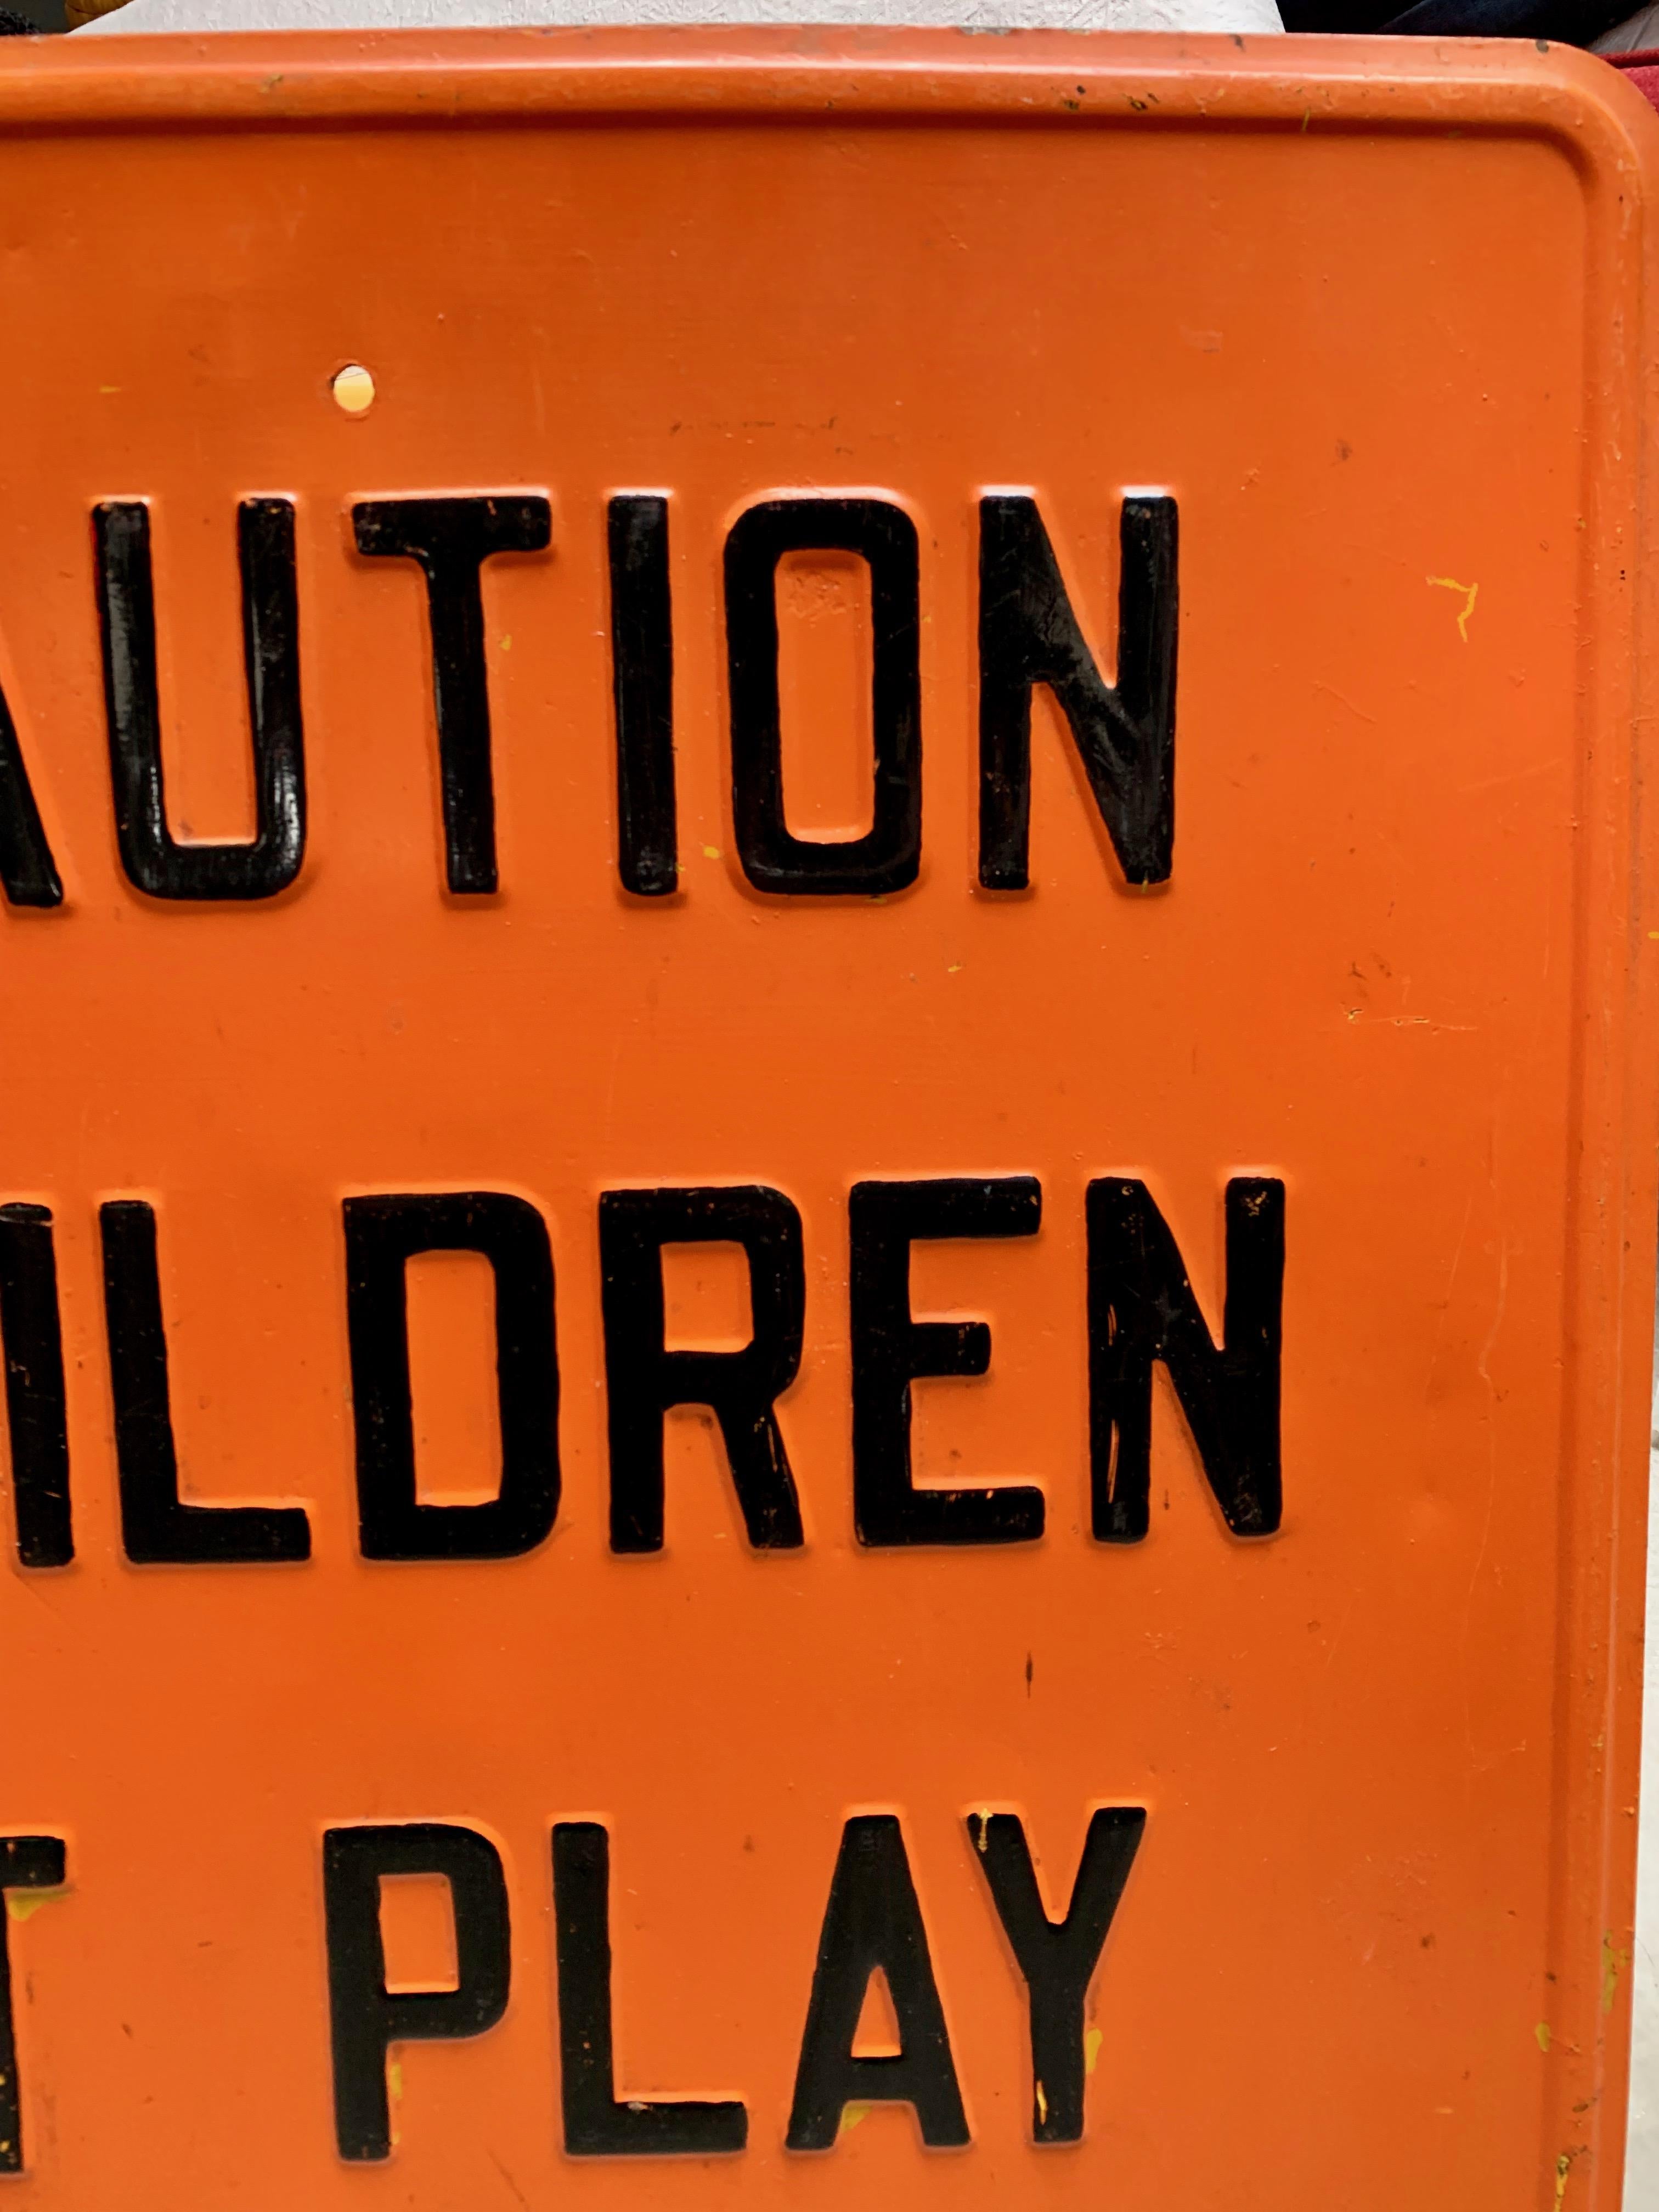 caution children playing sign